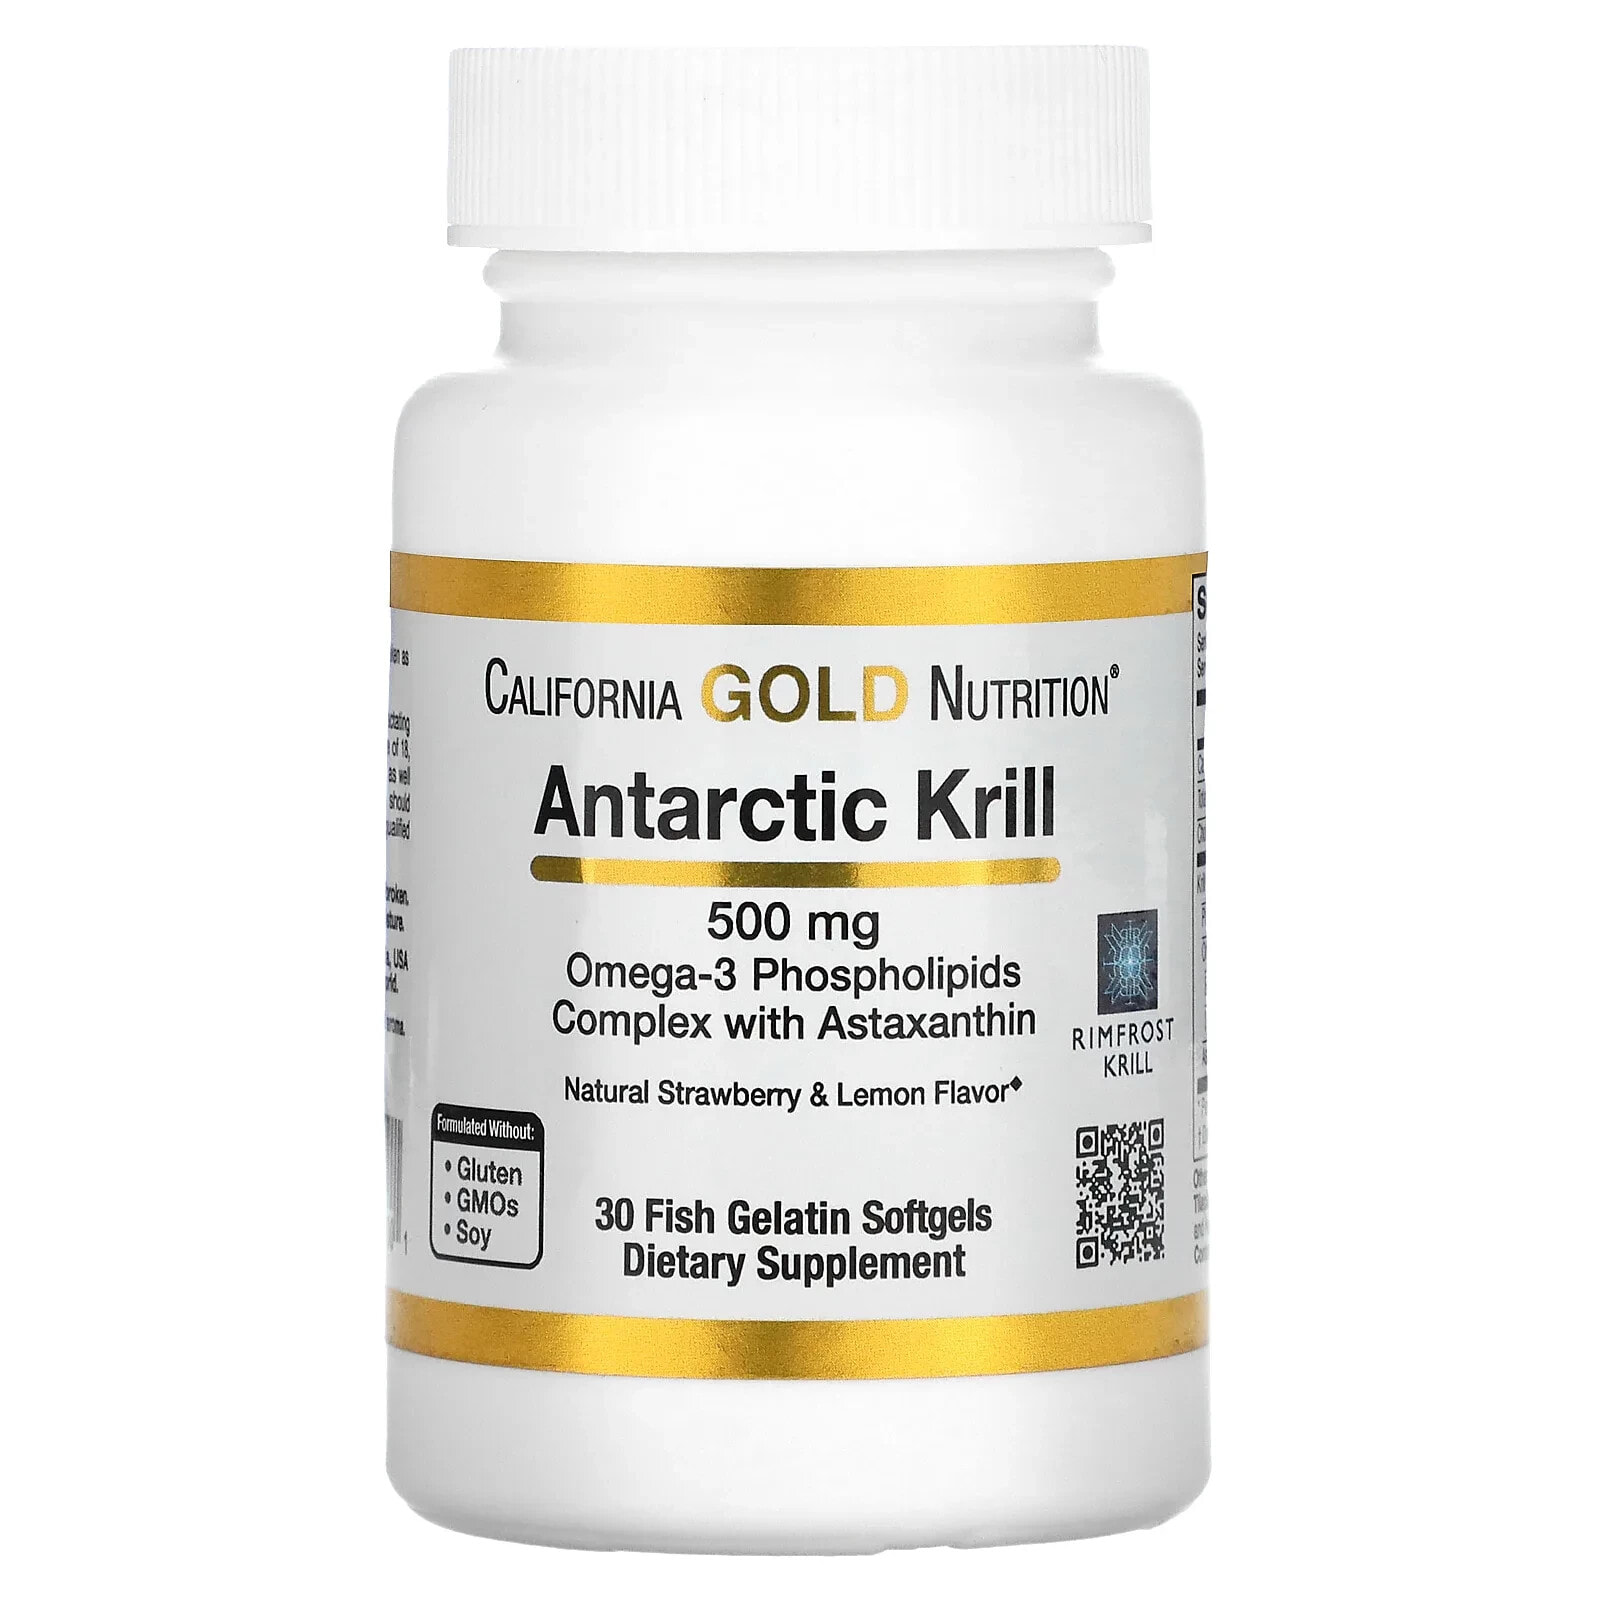 Antarctic Krill Oil, Omega-3 Phospholipids Complex with Astaxanthin, Natural Strawberry and Lemon Flavor, 1,000 mg, 120 Fish Gelatin Softgels